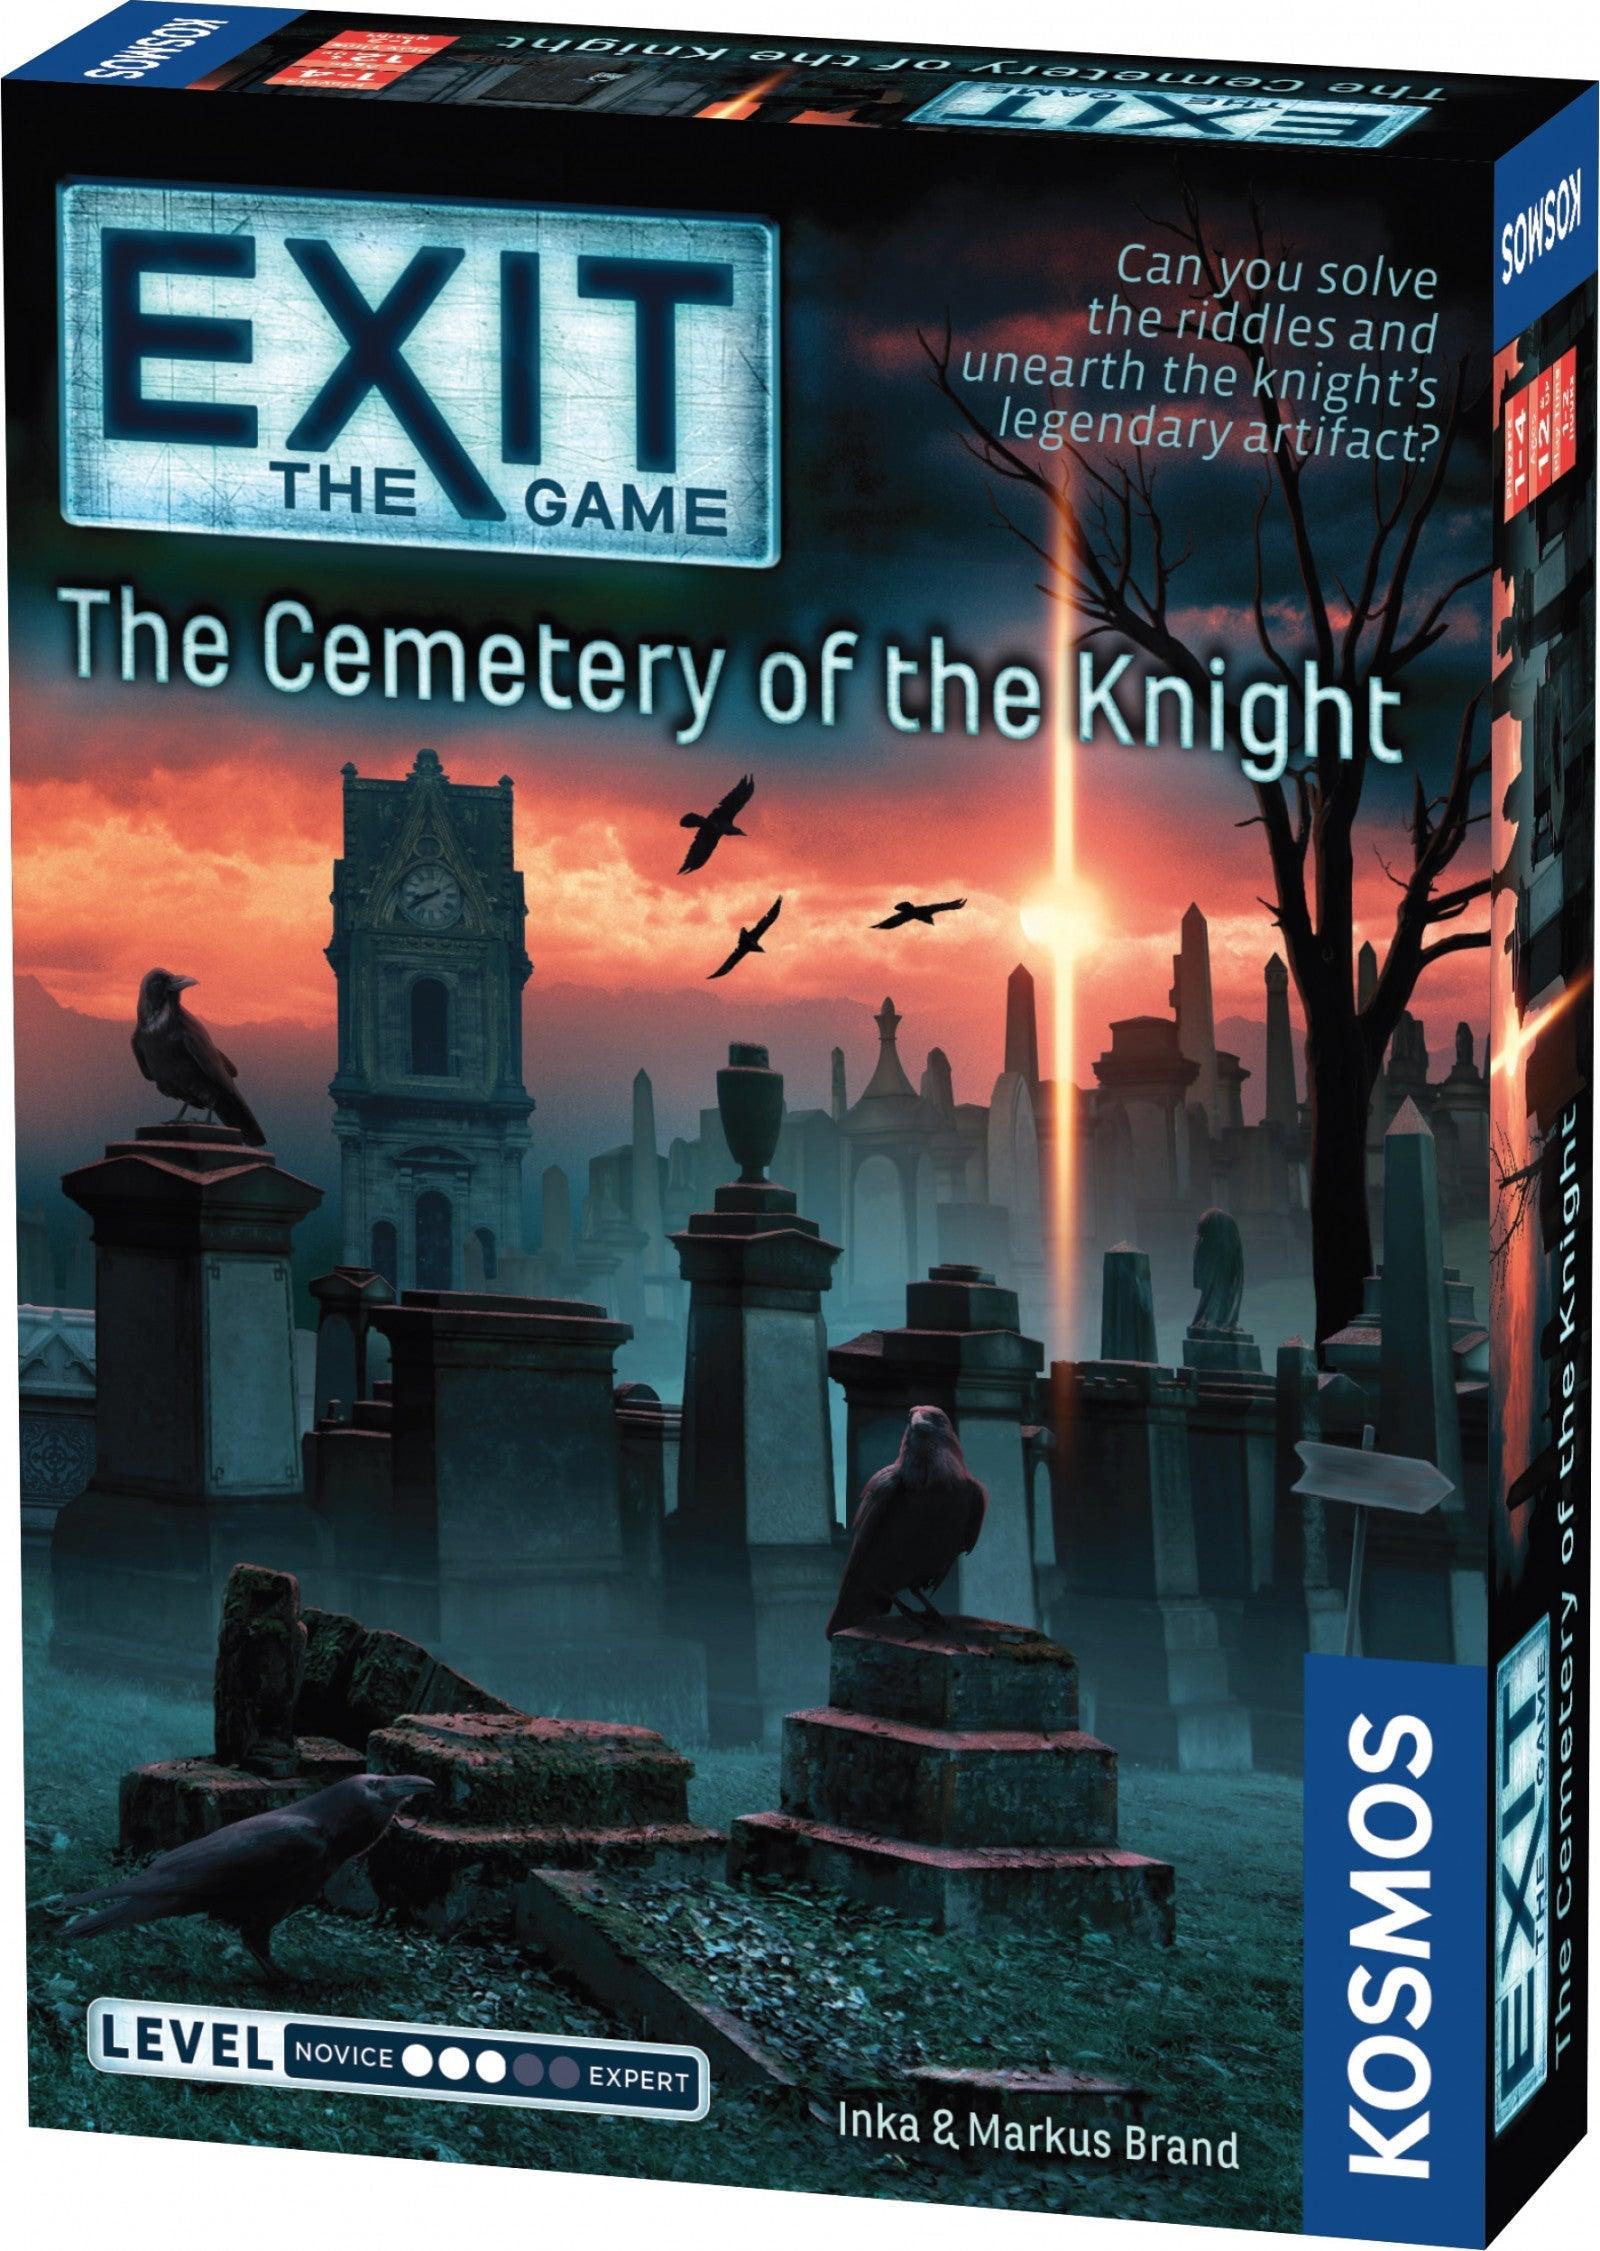 VR-77318 Exit the Game the Cemetery of the Knight - Kosmos - Titan Pop Culture